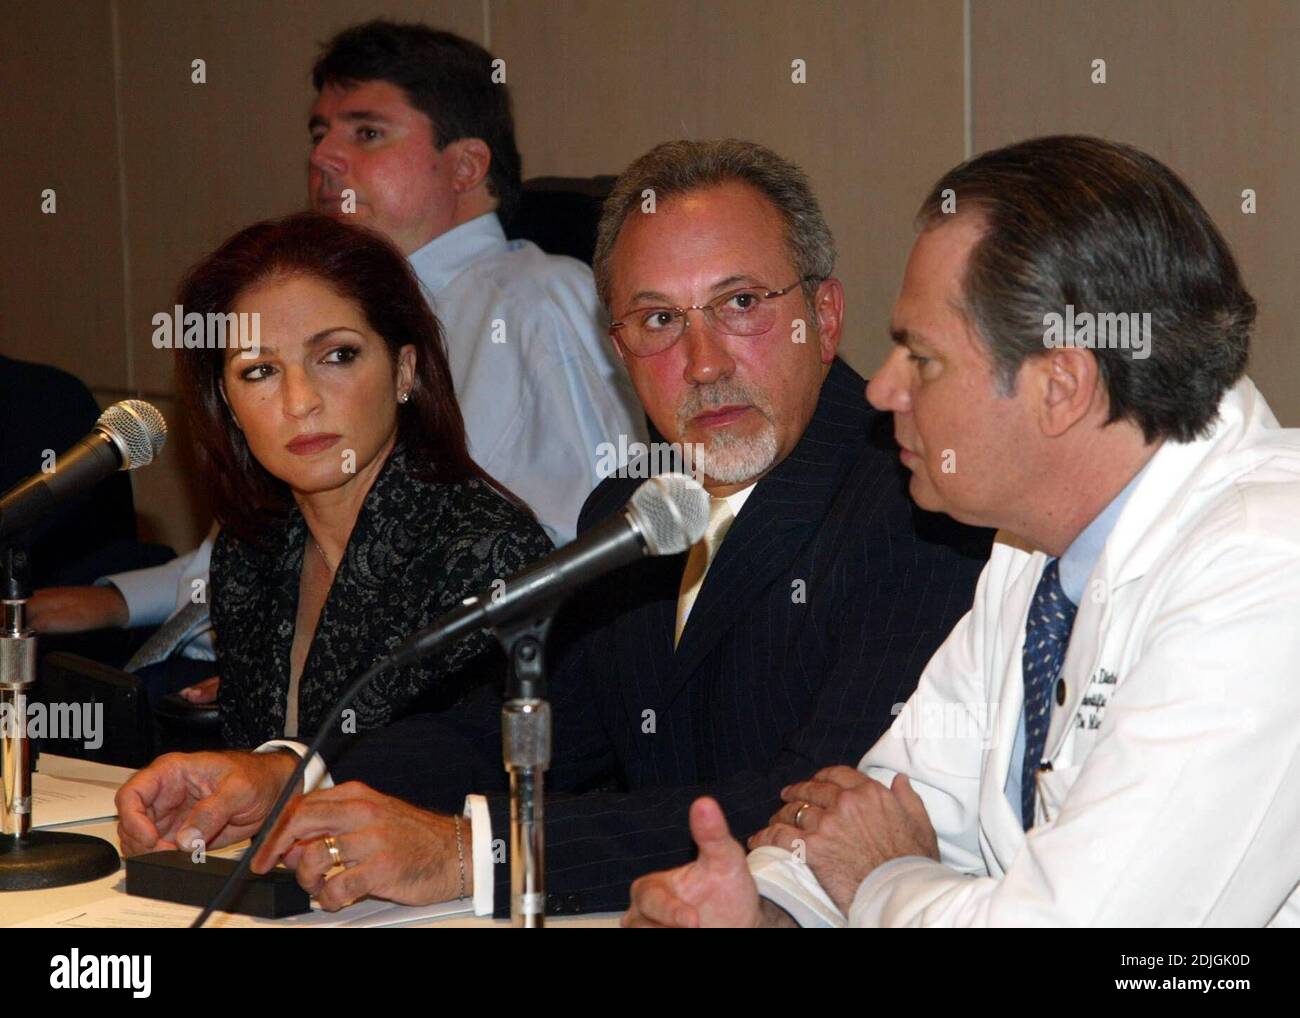 Gloria and Emilio Estefan Announcce $1m gift to help the Miami Project to Cure Paralysis, Launch Human Clinical Program located at the University of Miami, Miller School of Medicine. 3/21/06 Stock Photo